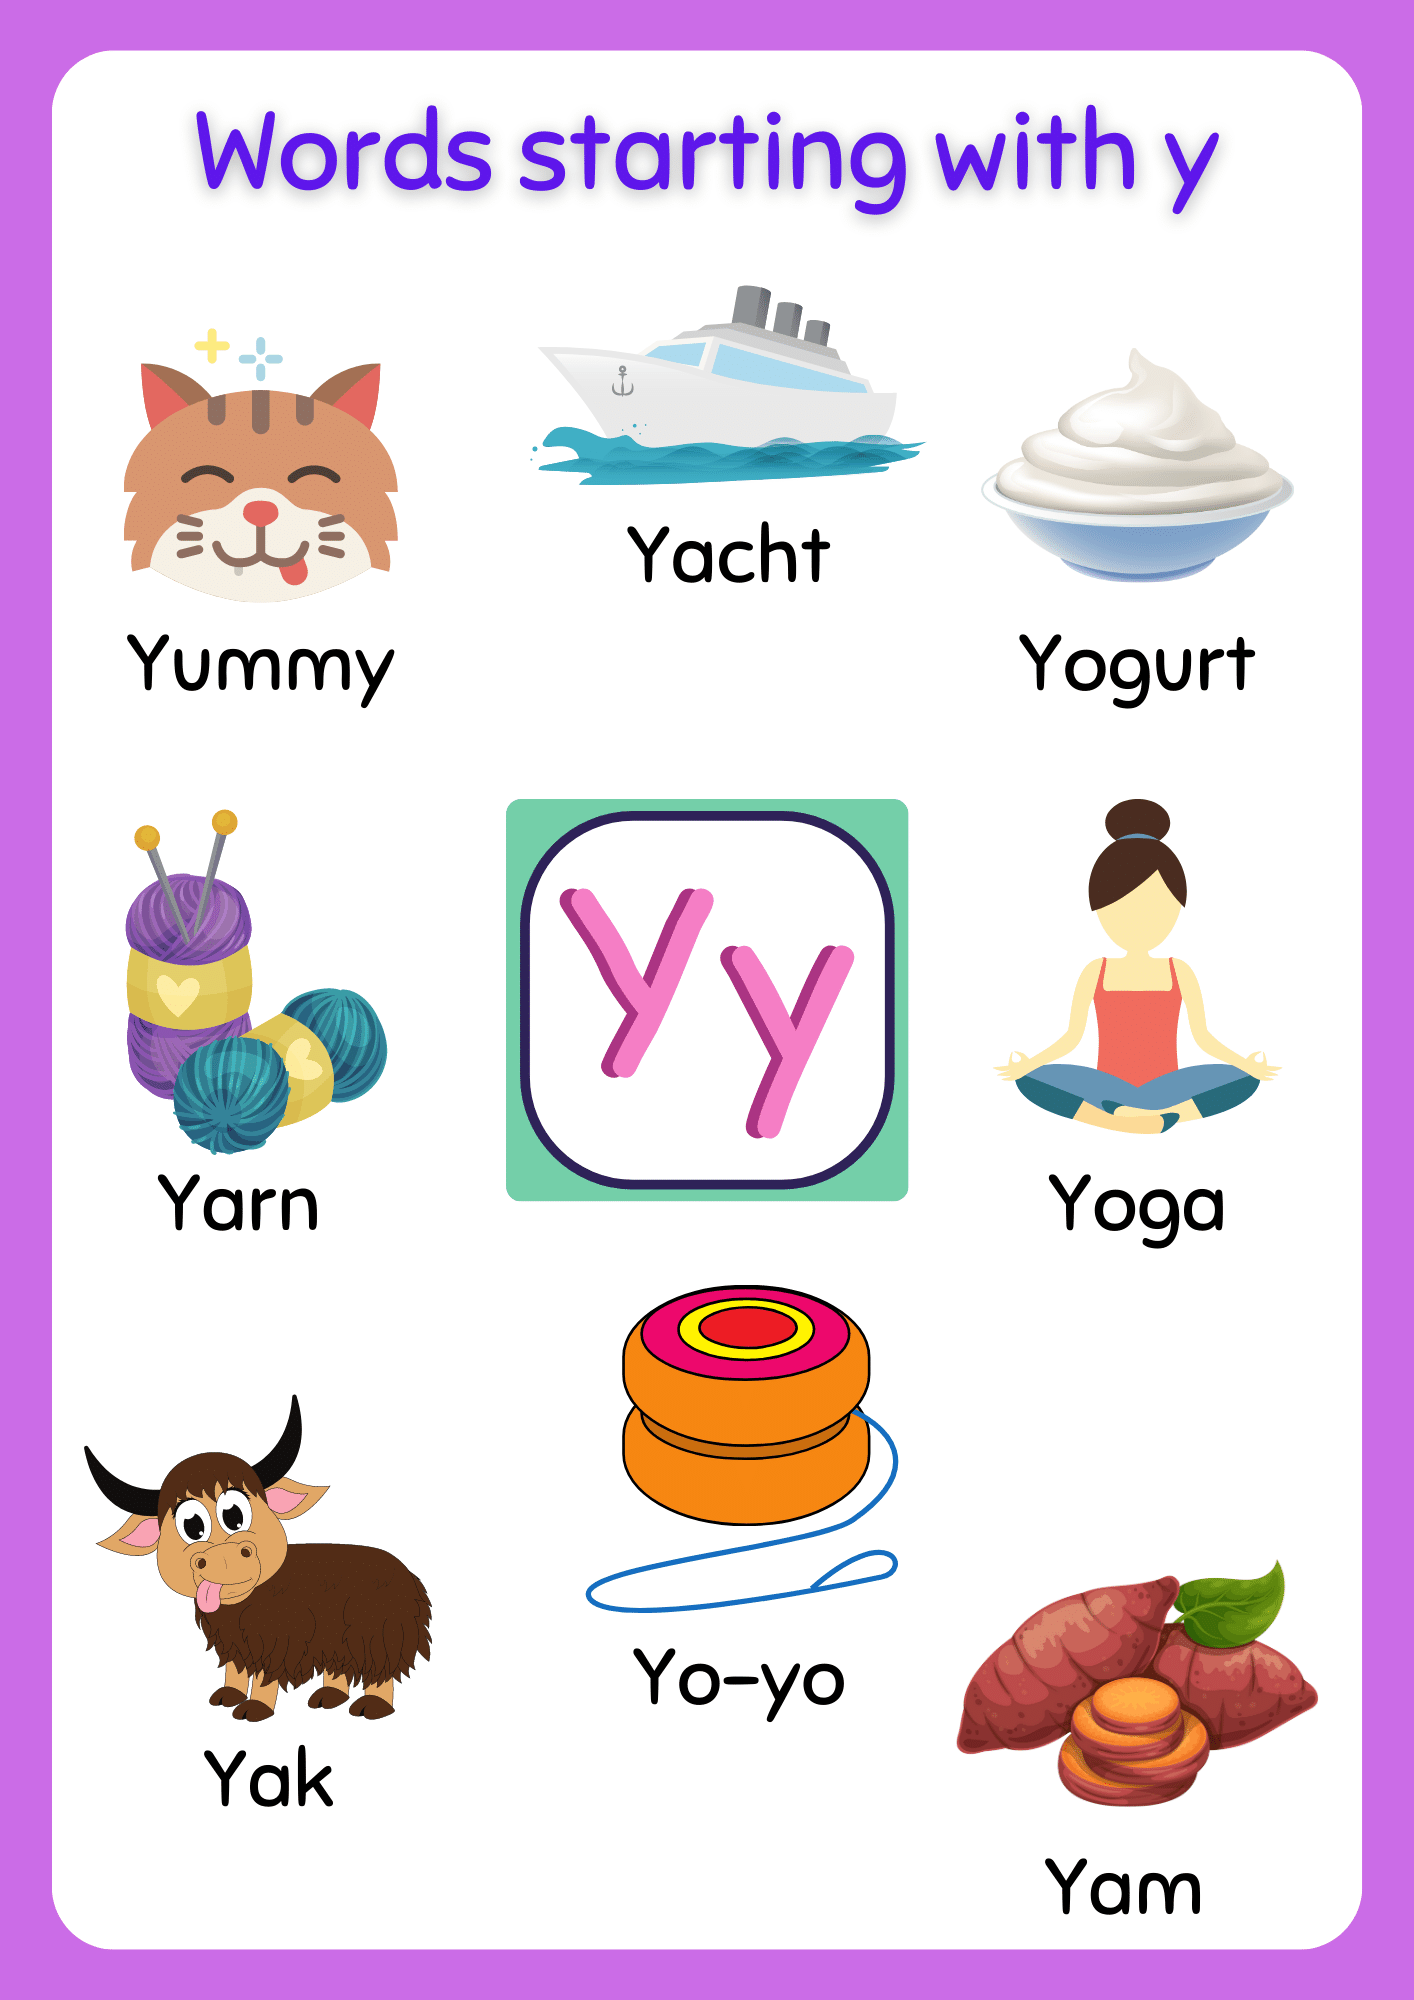 Words that start with Letter Y Vocabulary List of words with Y